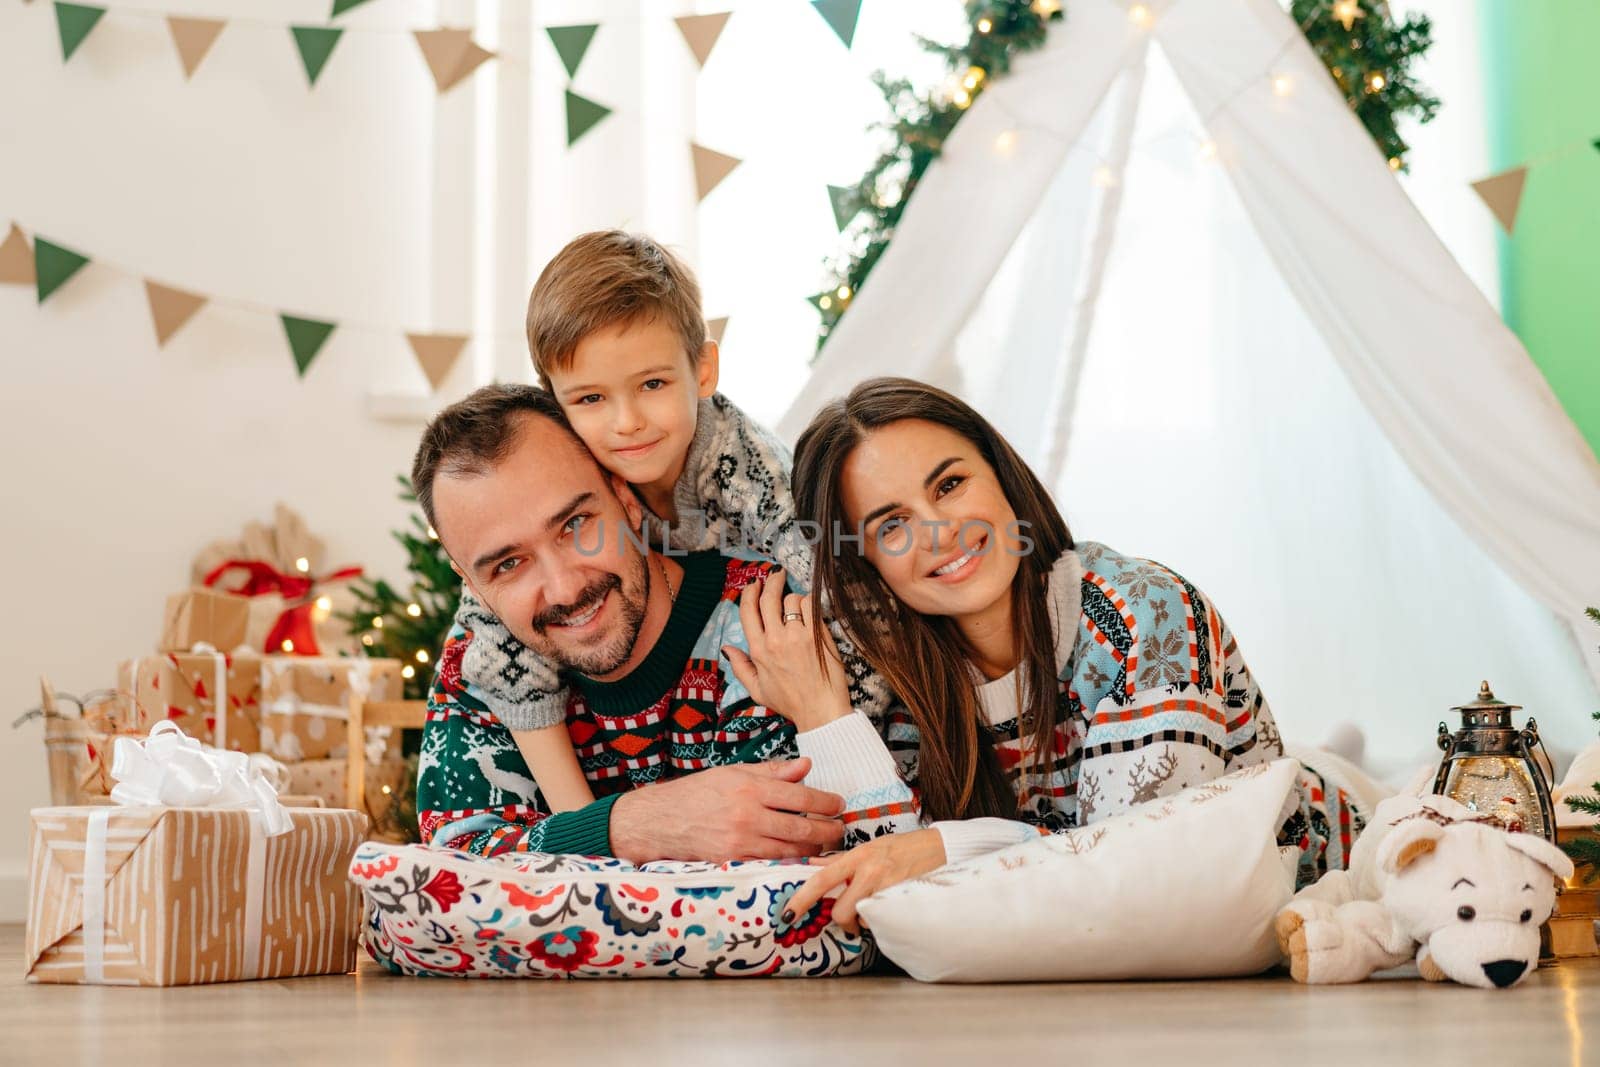 Happy parents play with their little son in a teepee during Christmas holidays, close up